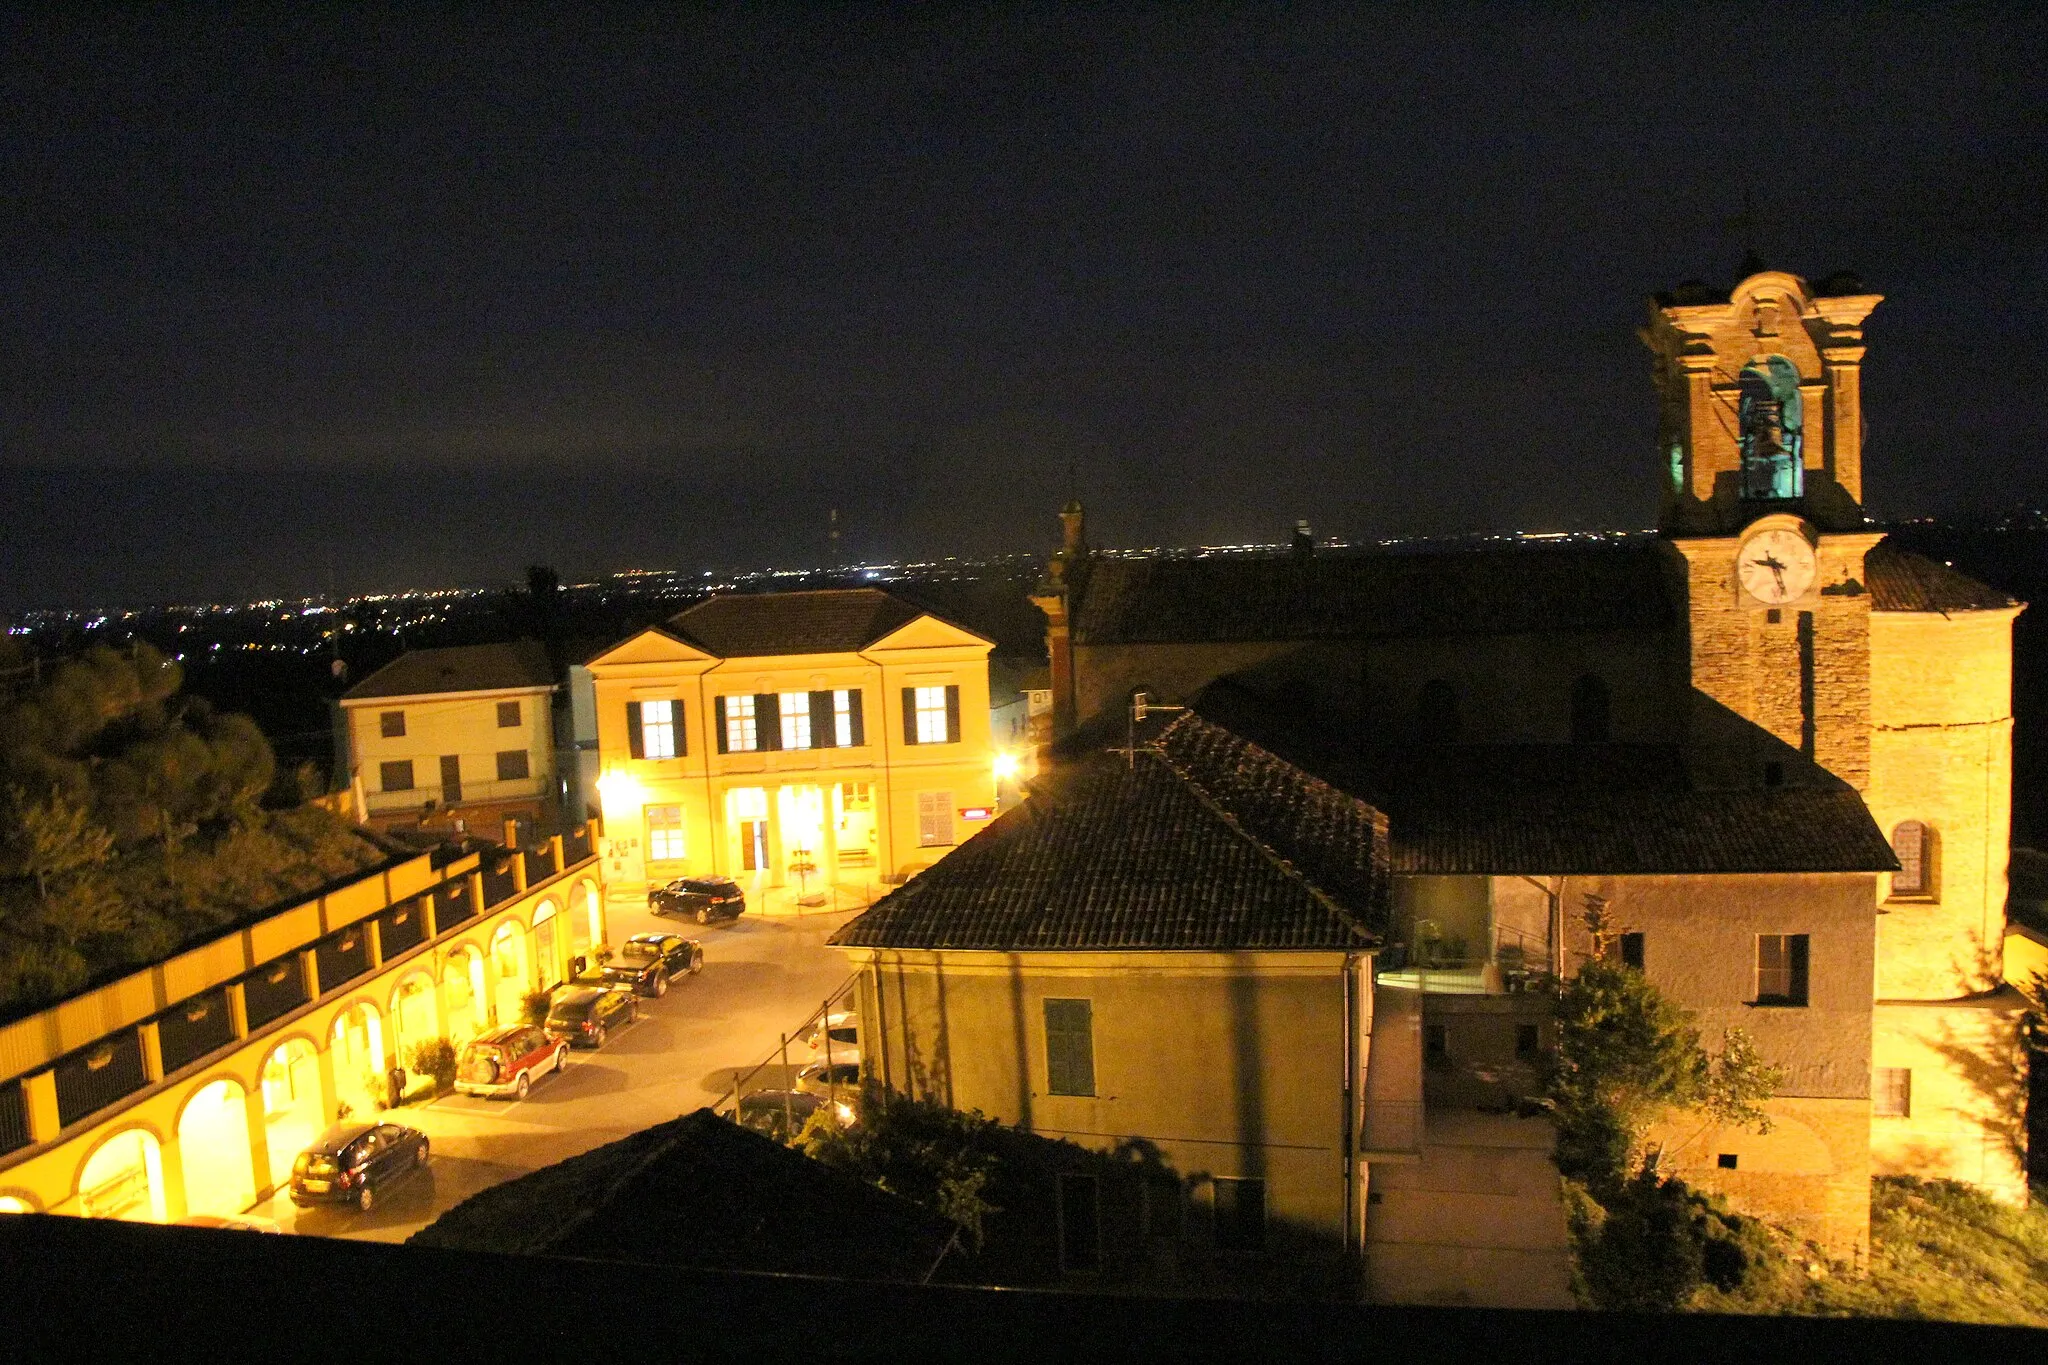 Photo showing: Alice Bel Colle at night from the Hotel Belvedere roof.Alice Bel Colle notte.